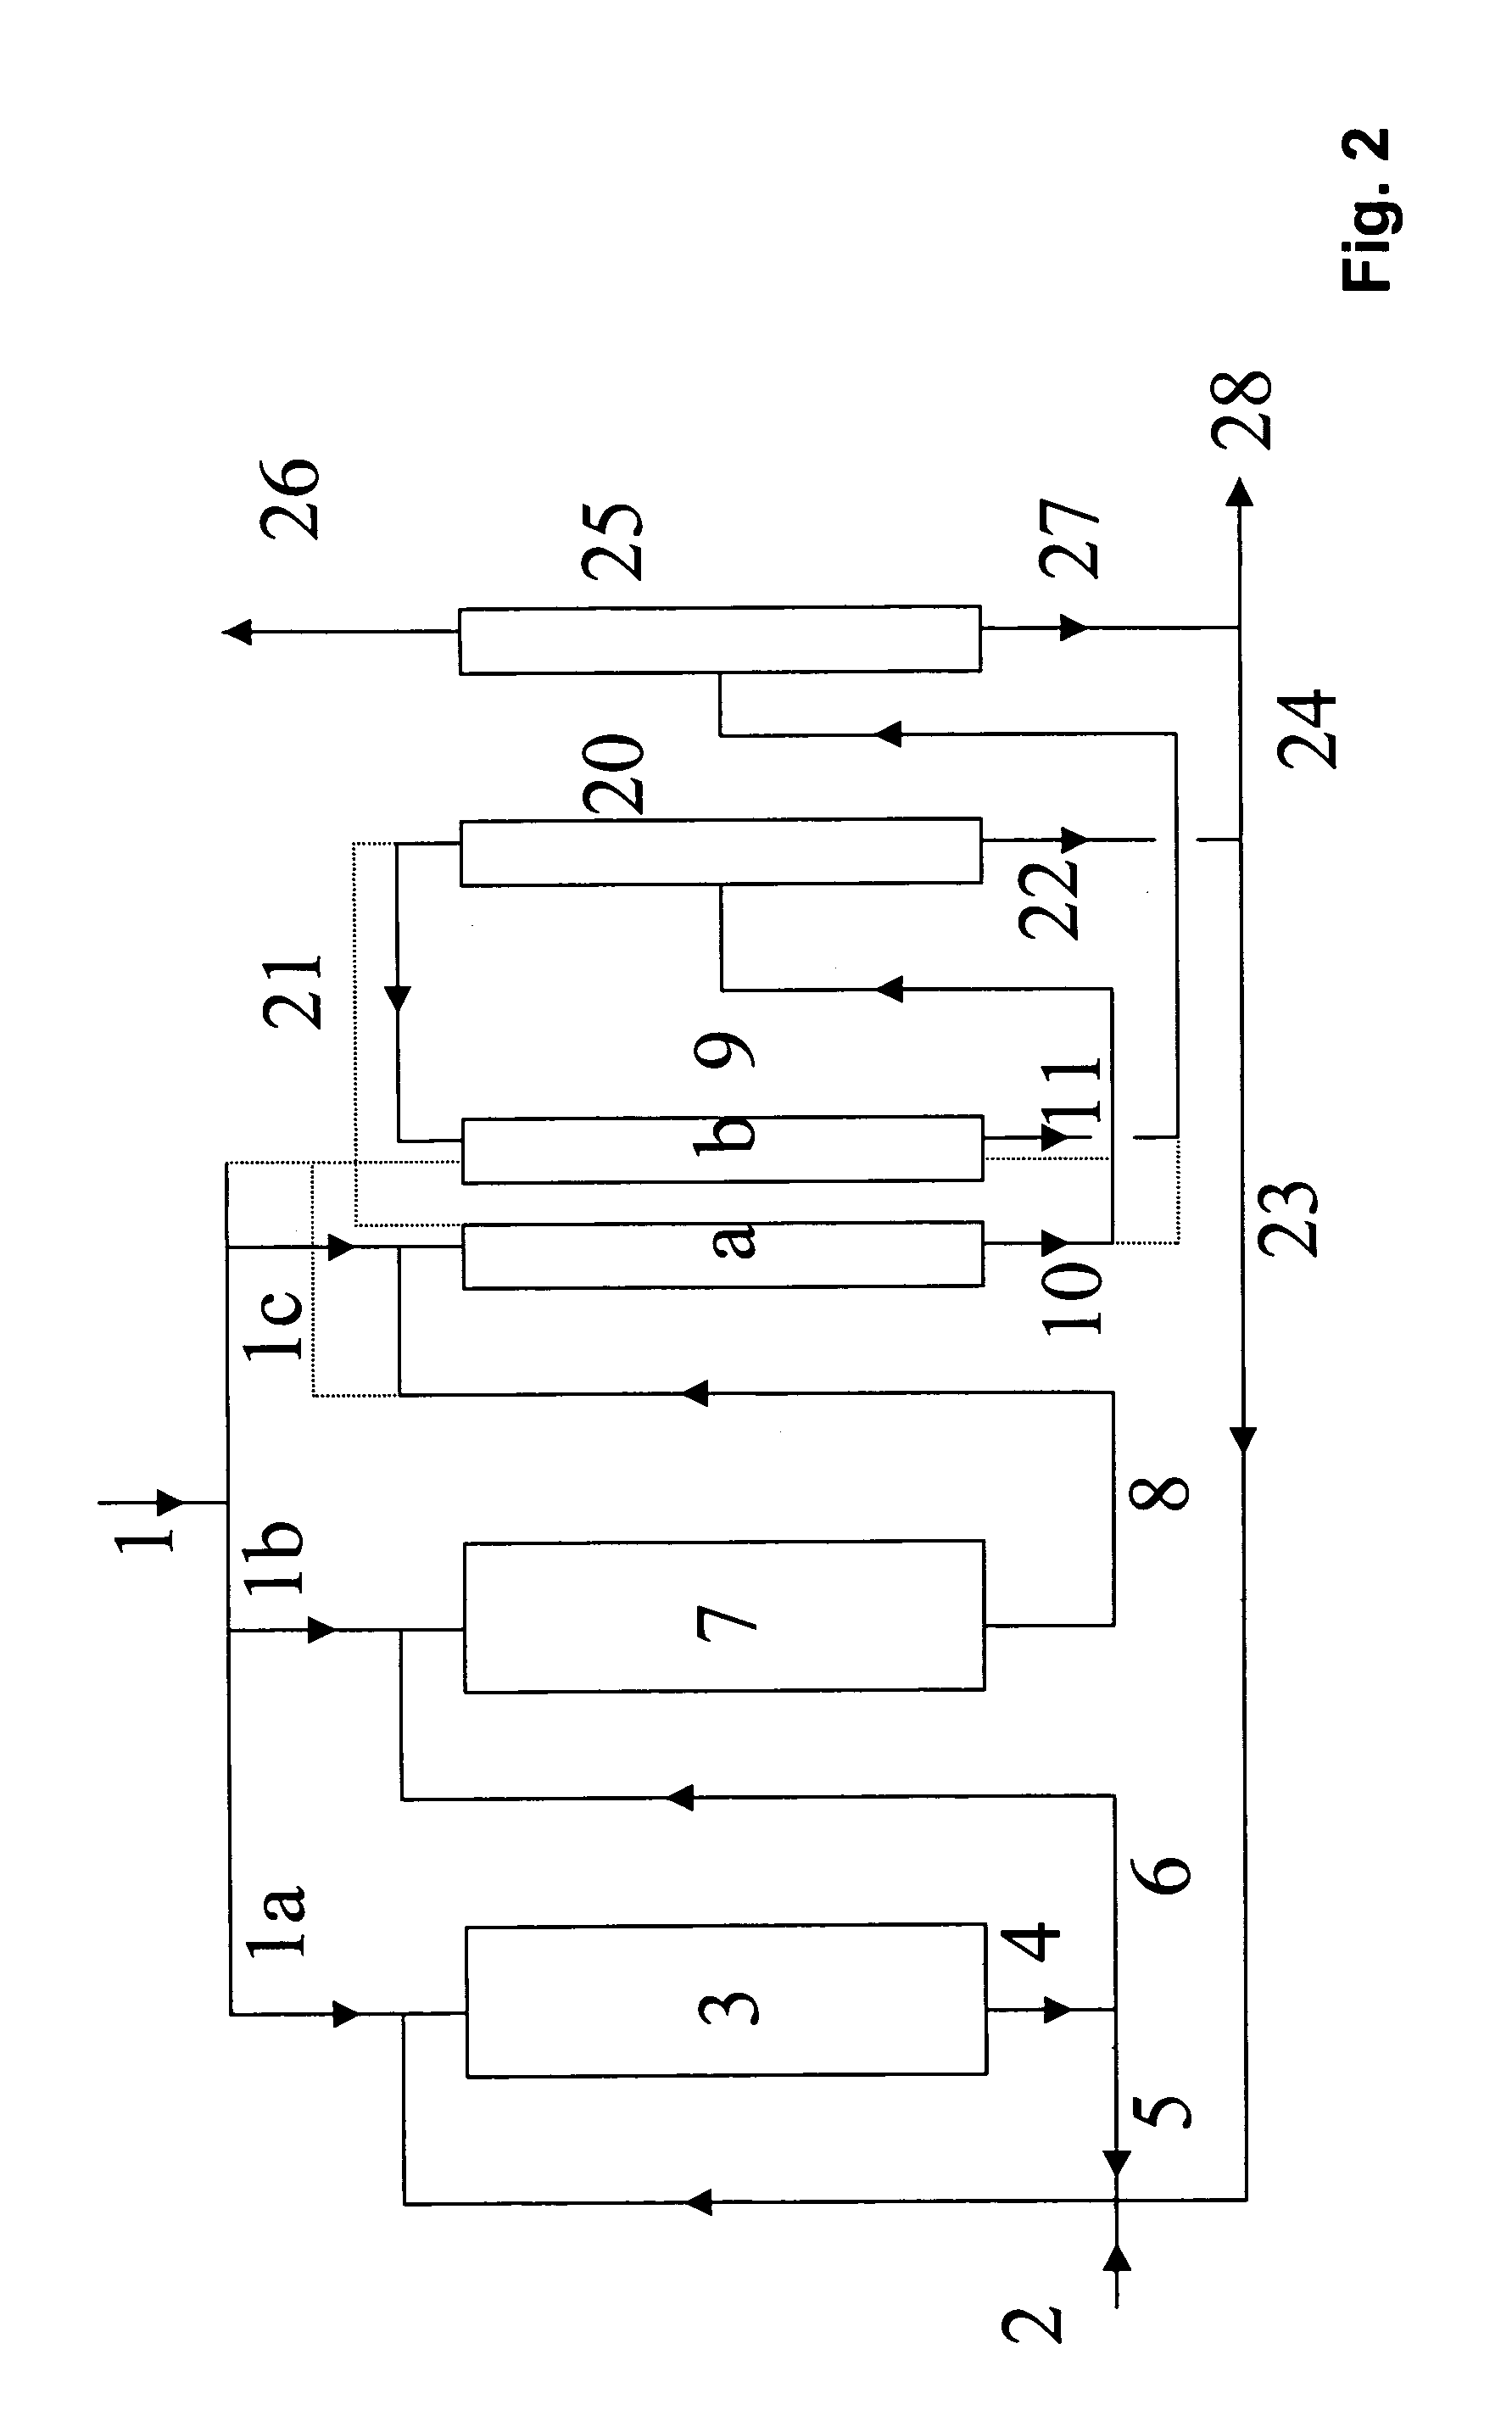 Process for preparing tert-butanol from isobutene-containing hydrocarbon mixtures